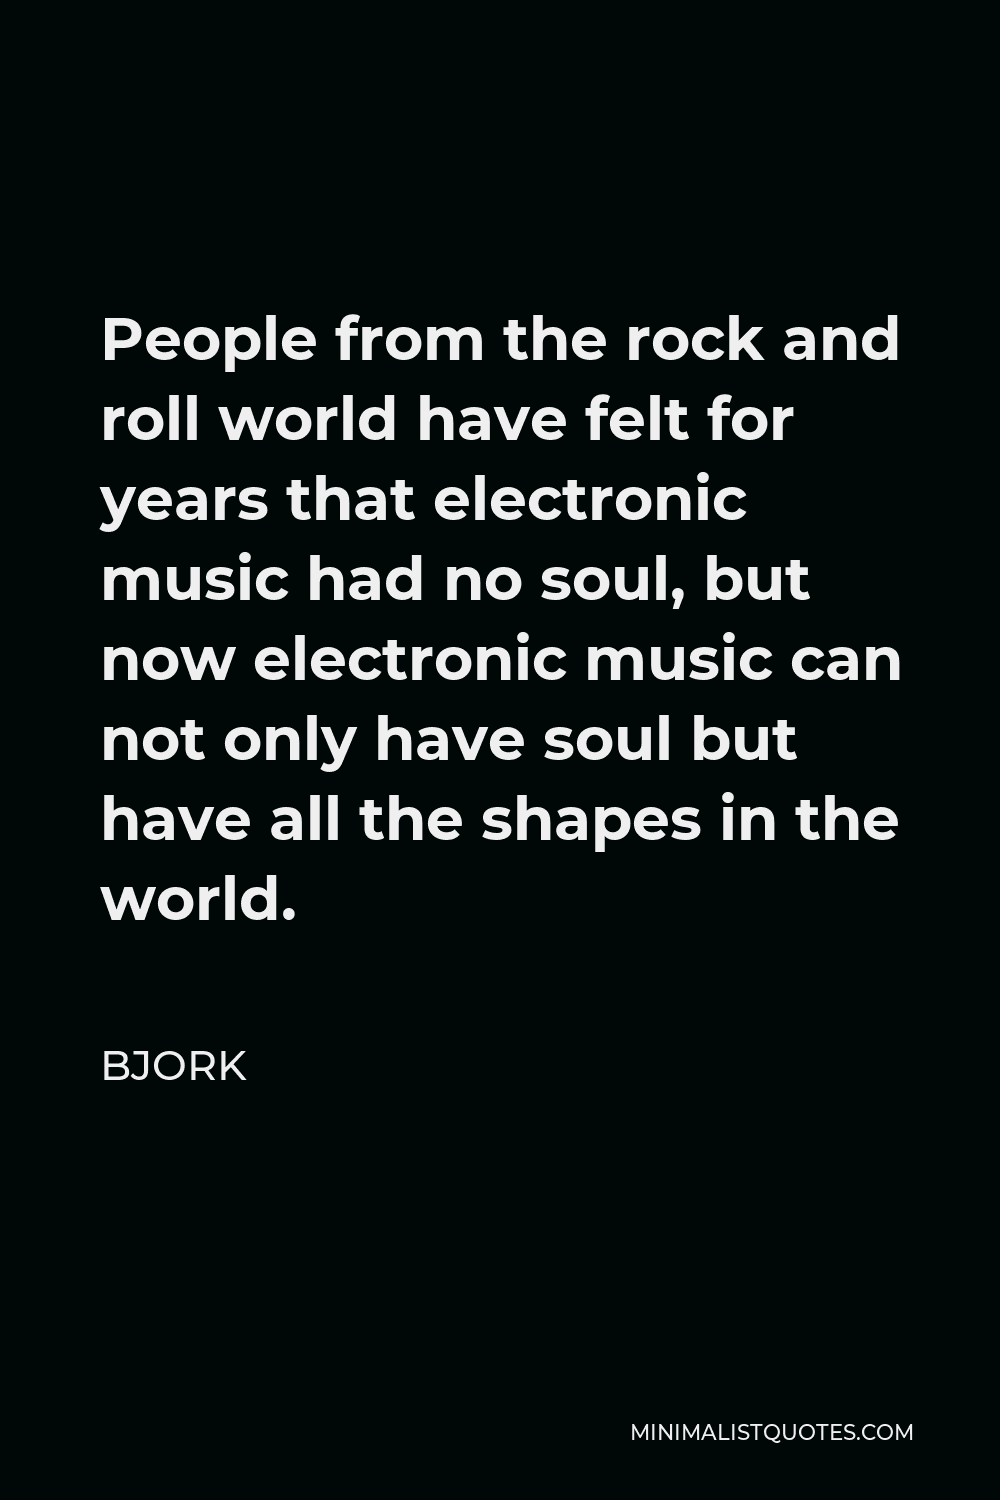 Bjork Quote - People from the rock and roll world have felt for years that electronic music had no soul, but now electronic music can not only have soul but have all the shapes in the world.